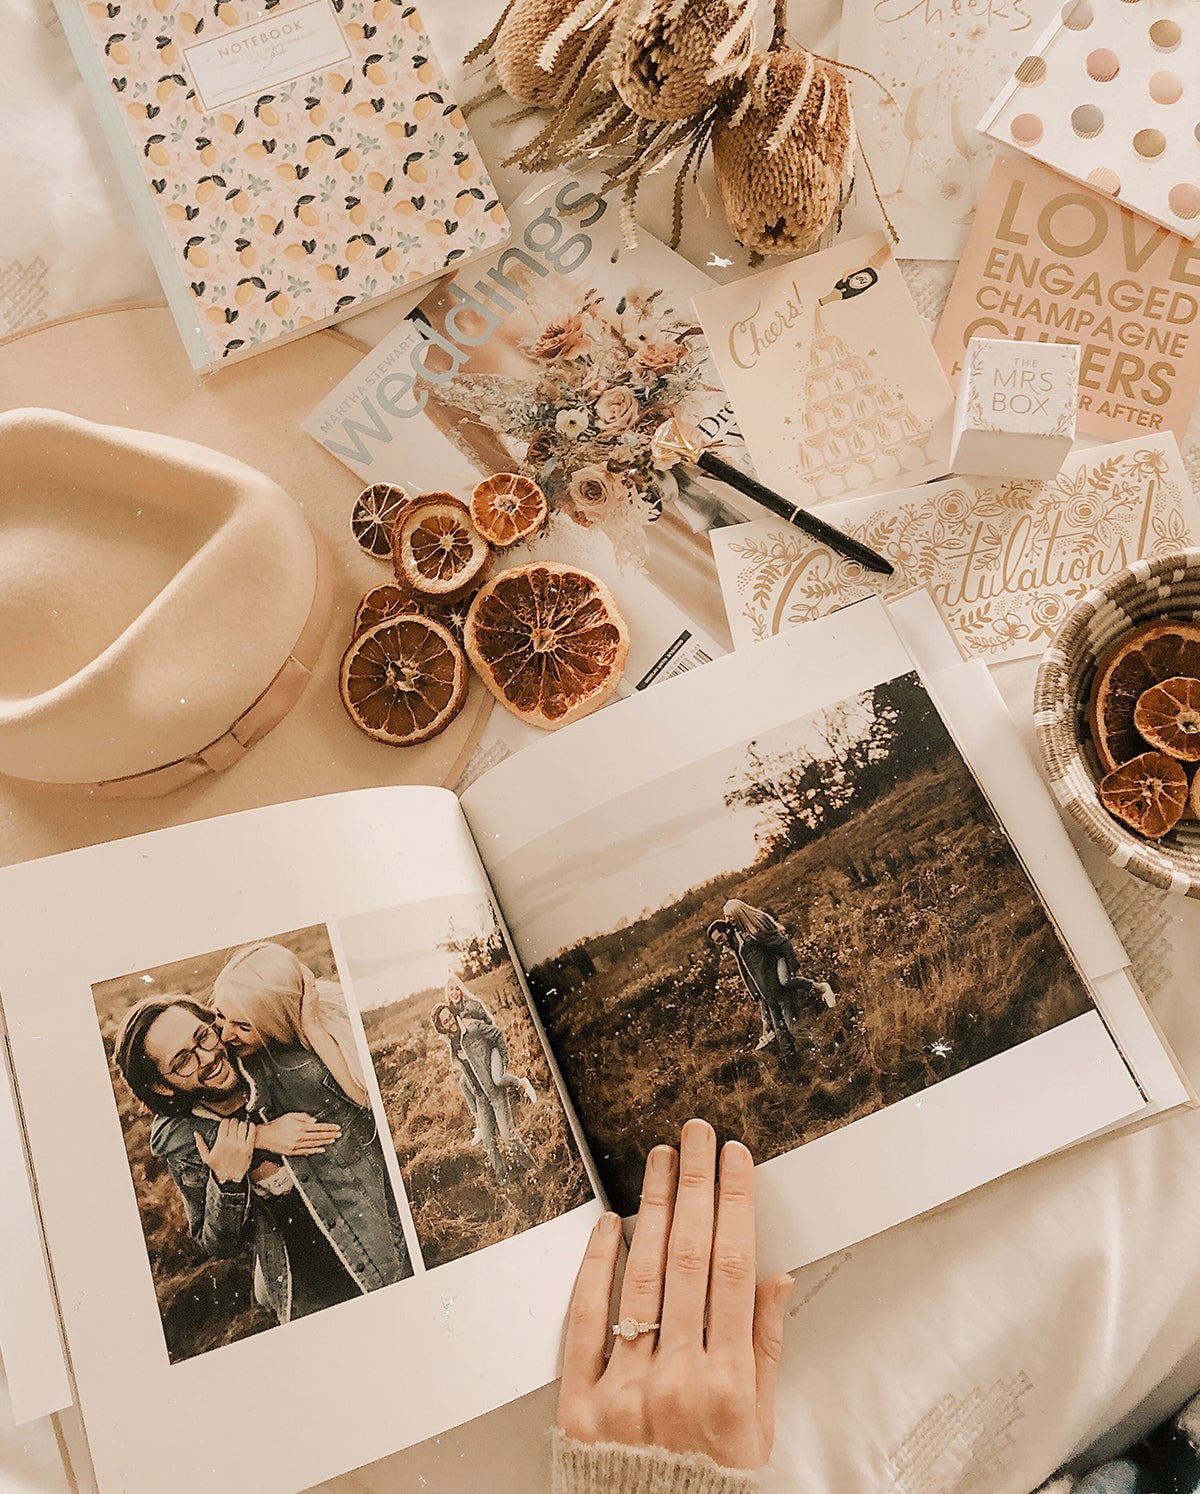 Artifact Uprising Hardcover Photo Book opened to engagement photos on table covered with wedding stationery and planning materials